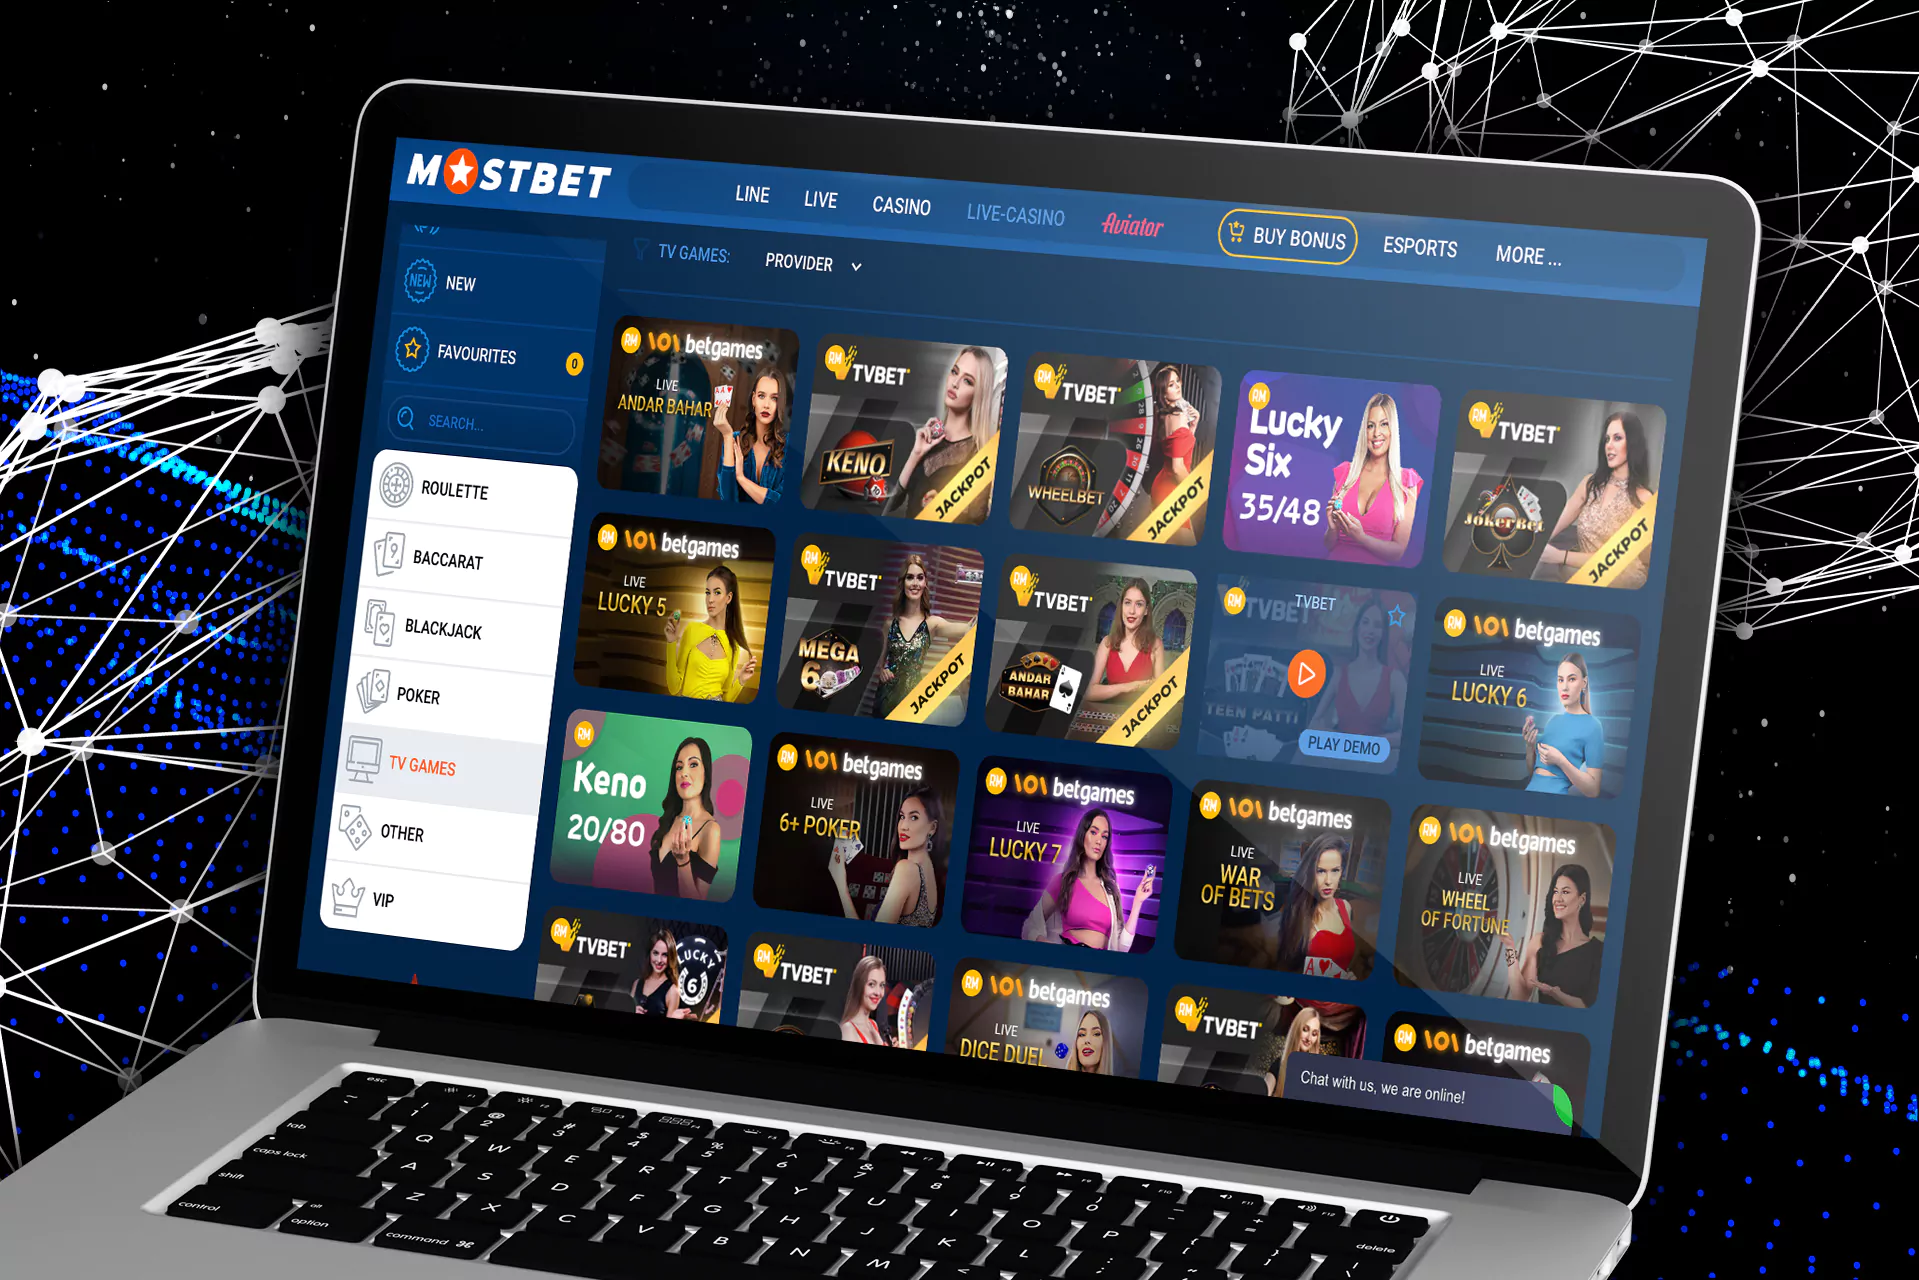 The list and variety of TV games at Mostbet.